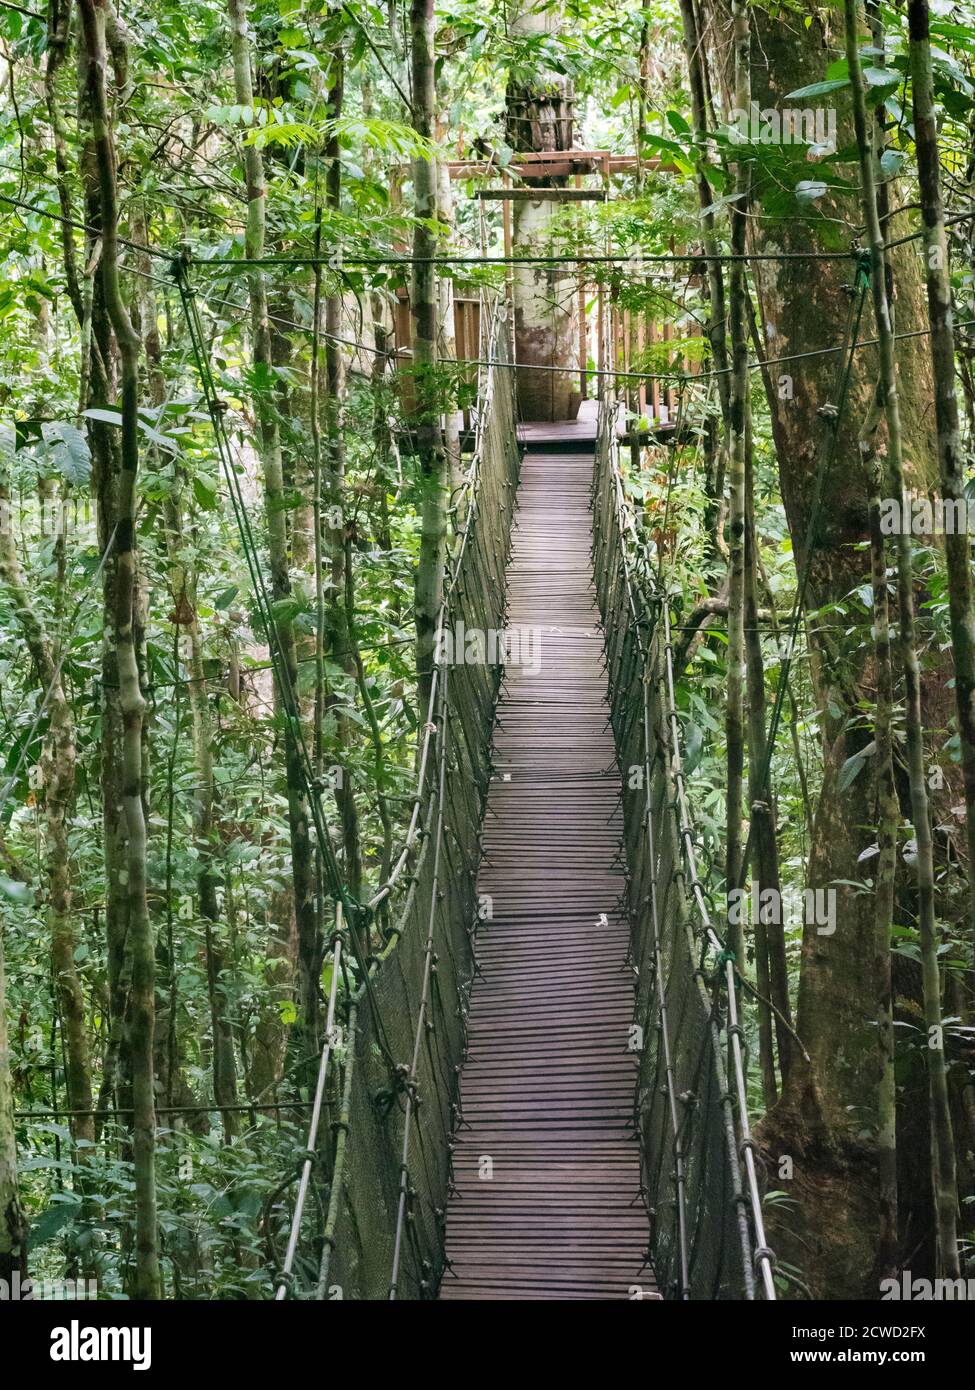 Canopy Cable Bridge For Tourists In Amazon Natural Park Río Marañon